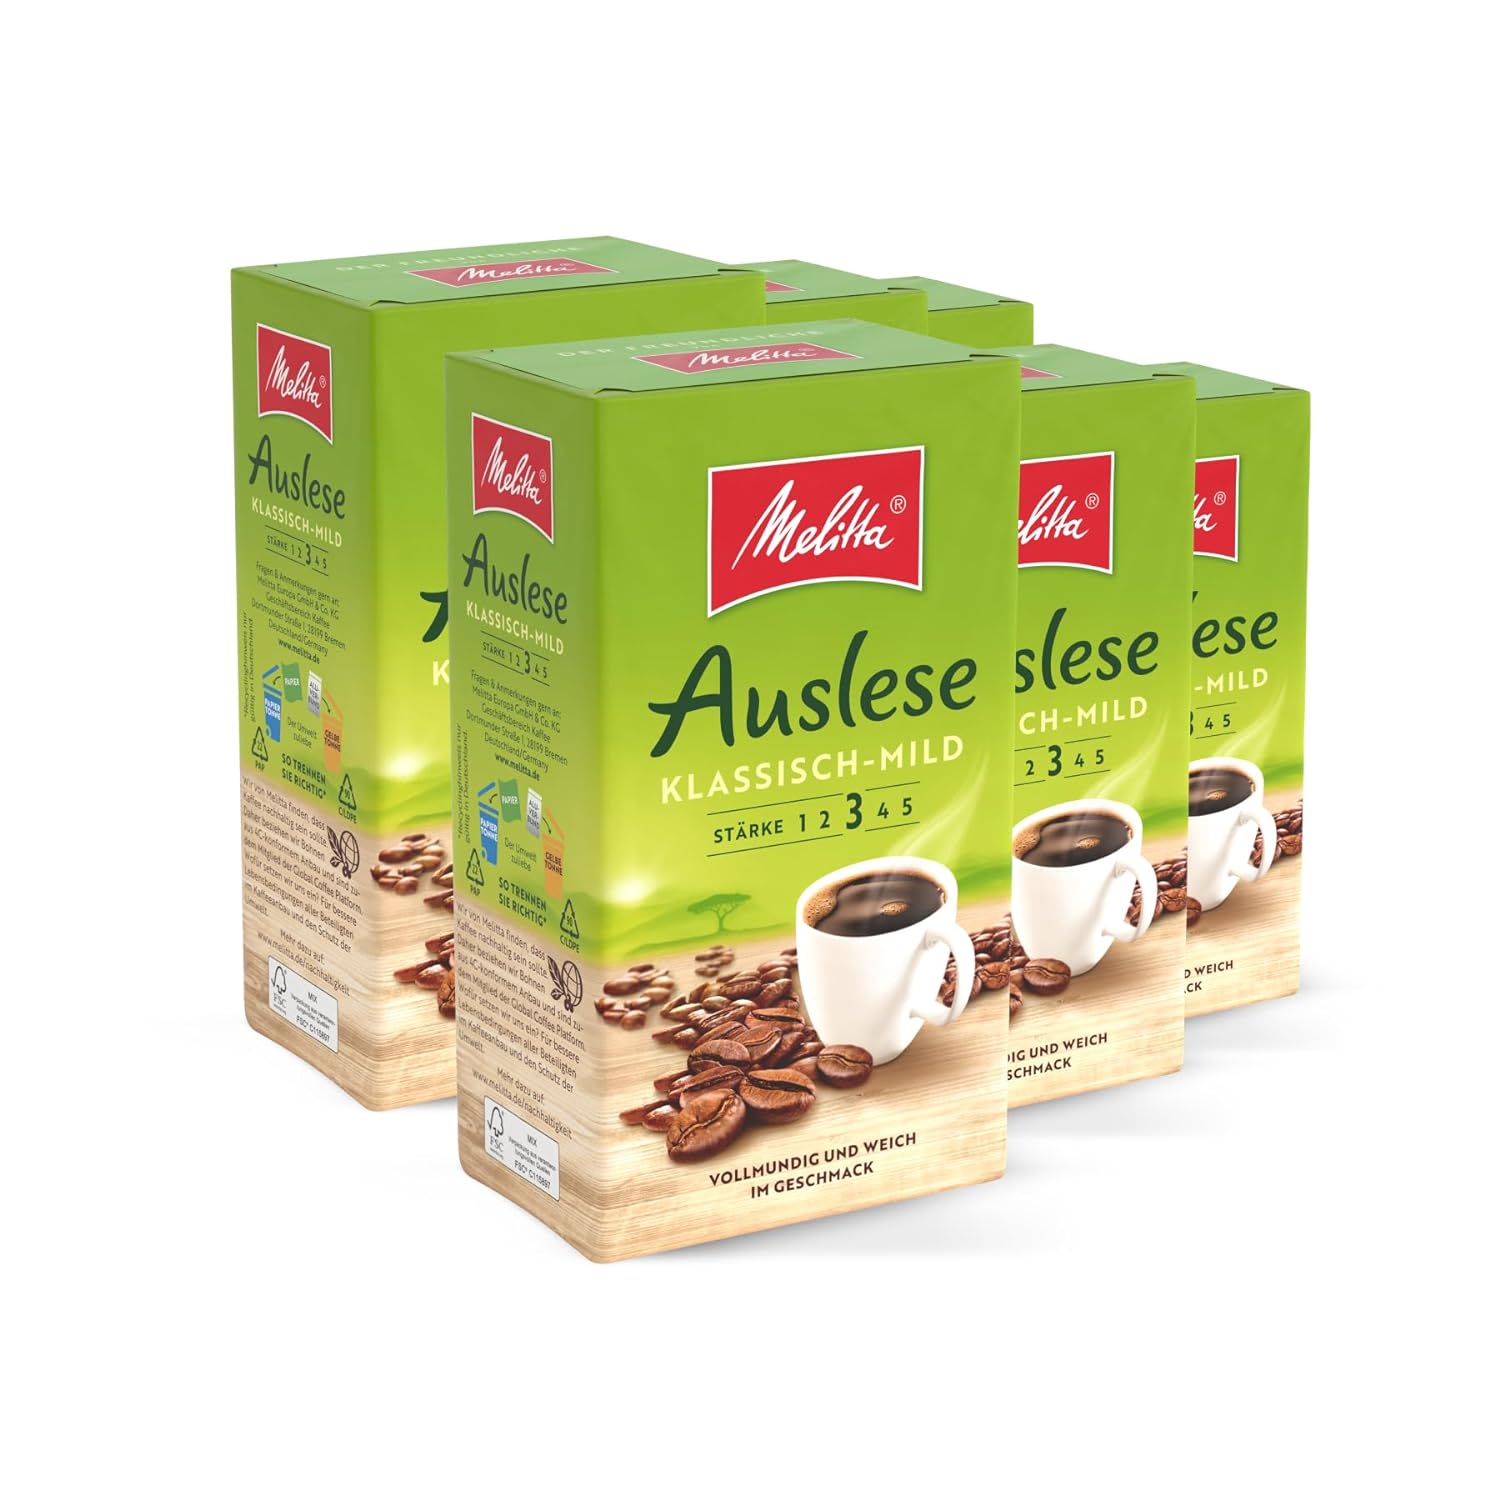 Melitta Auslese Classic Mild Filter Coffee 6 x 500 g, Ground, Powder for Filter Coffee Machines, Medium Roasting, Roasted in Germany, in Tray